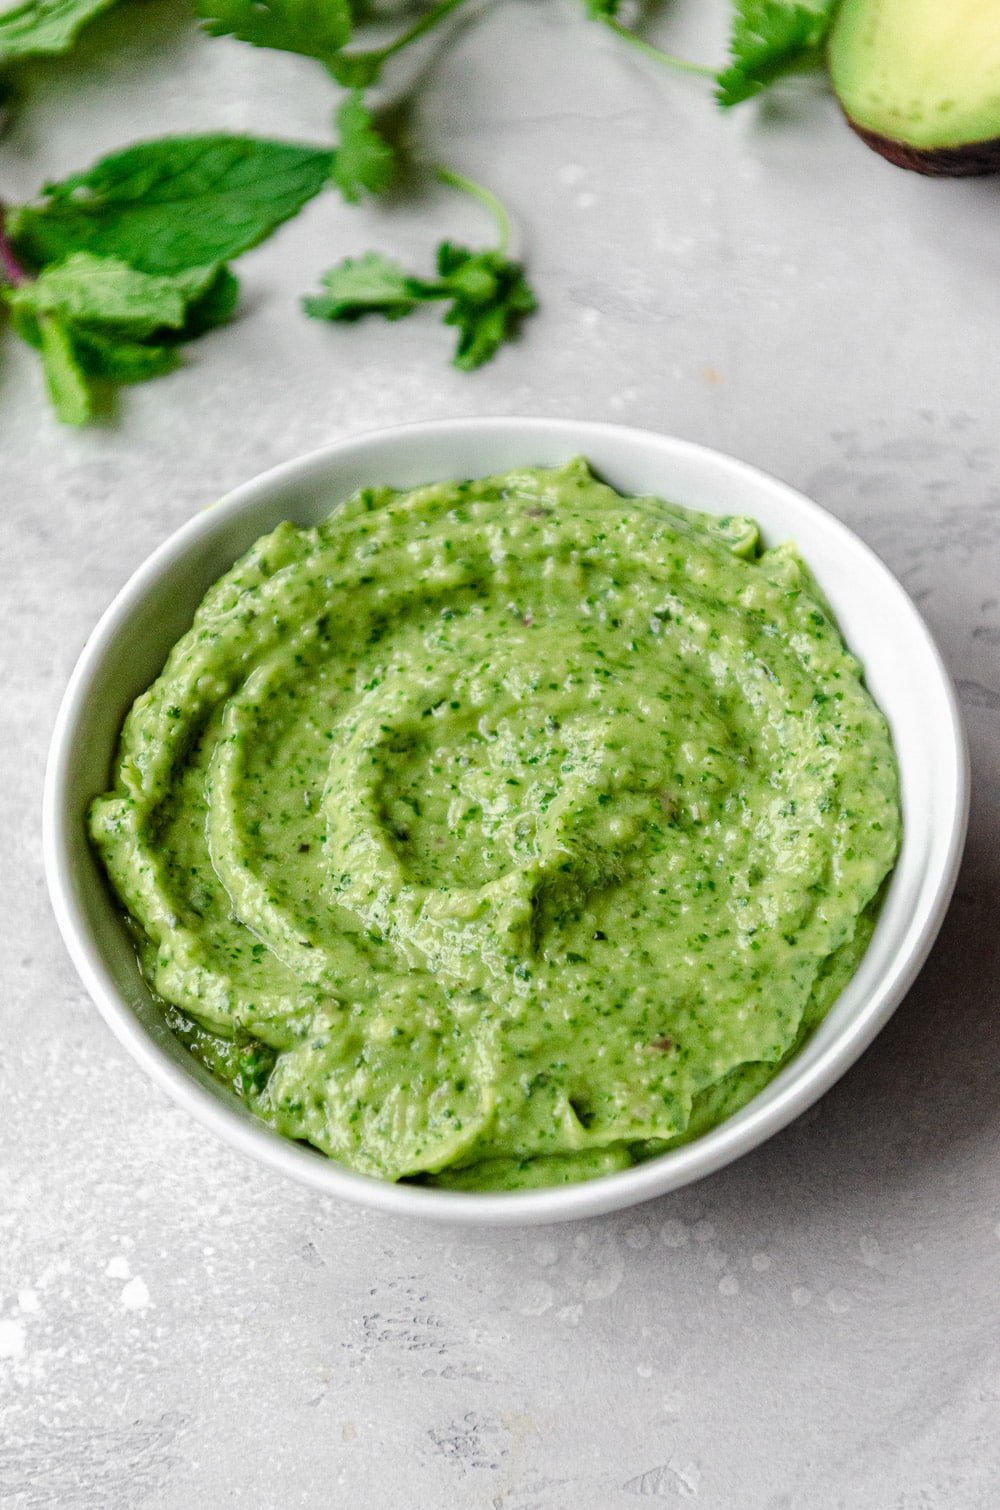 Close up of vegan green goddess dressing which is made from avocados. Surrounded by herbs and an avocado.